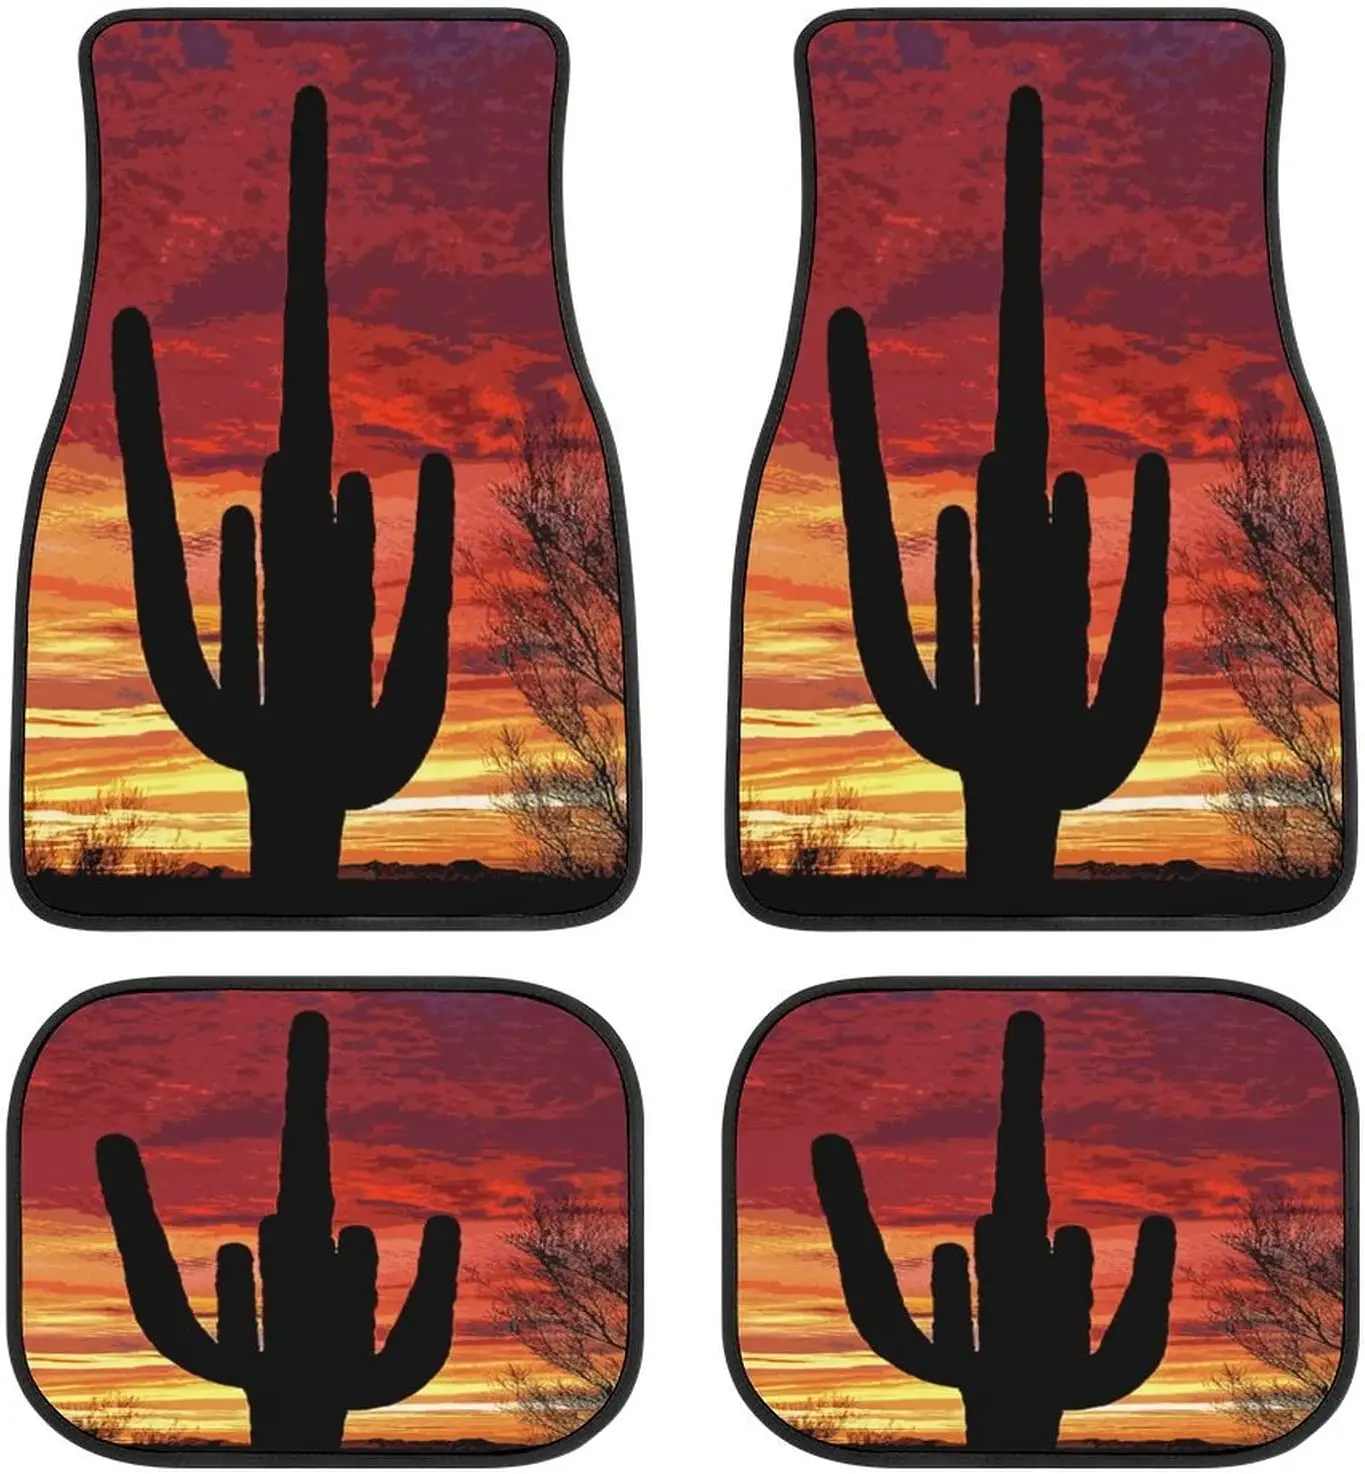 

Sunset Cactus Black and White Car Mats Universal Drive Seat Carpet Vehicle Interior Protector Mats Funny Designs All-Weather Mat